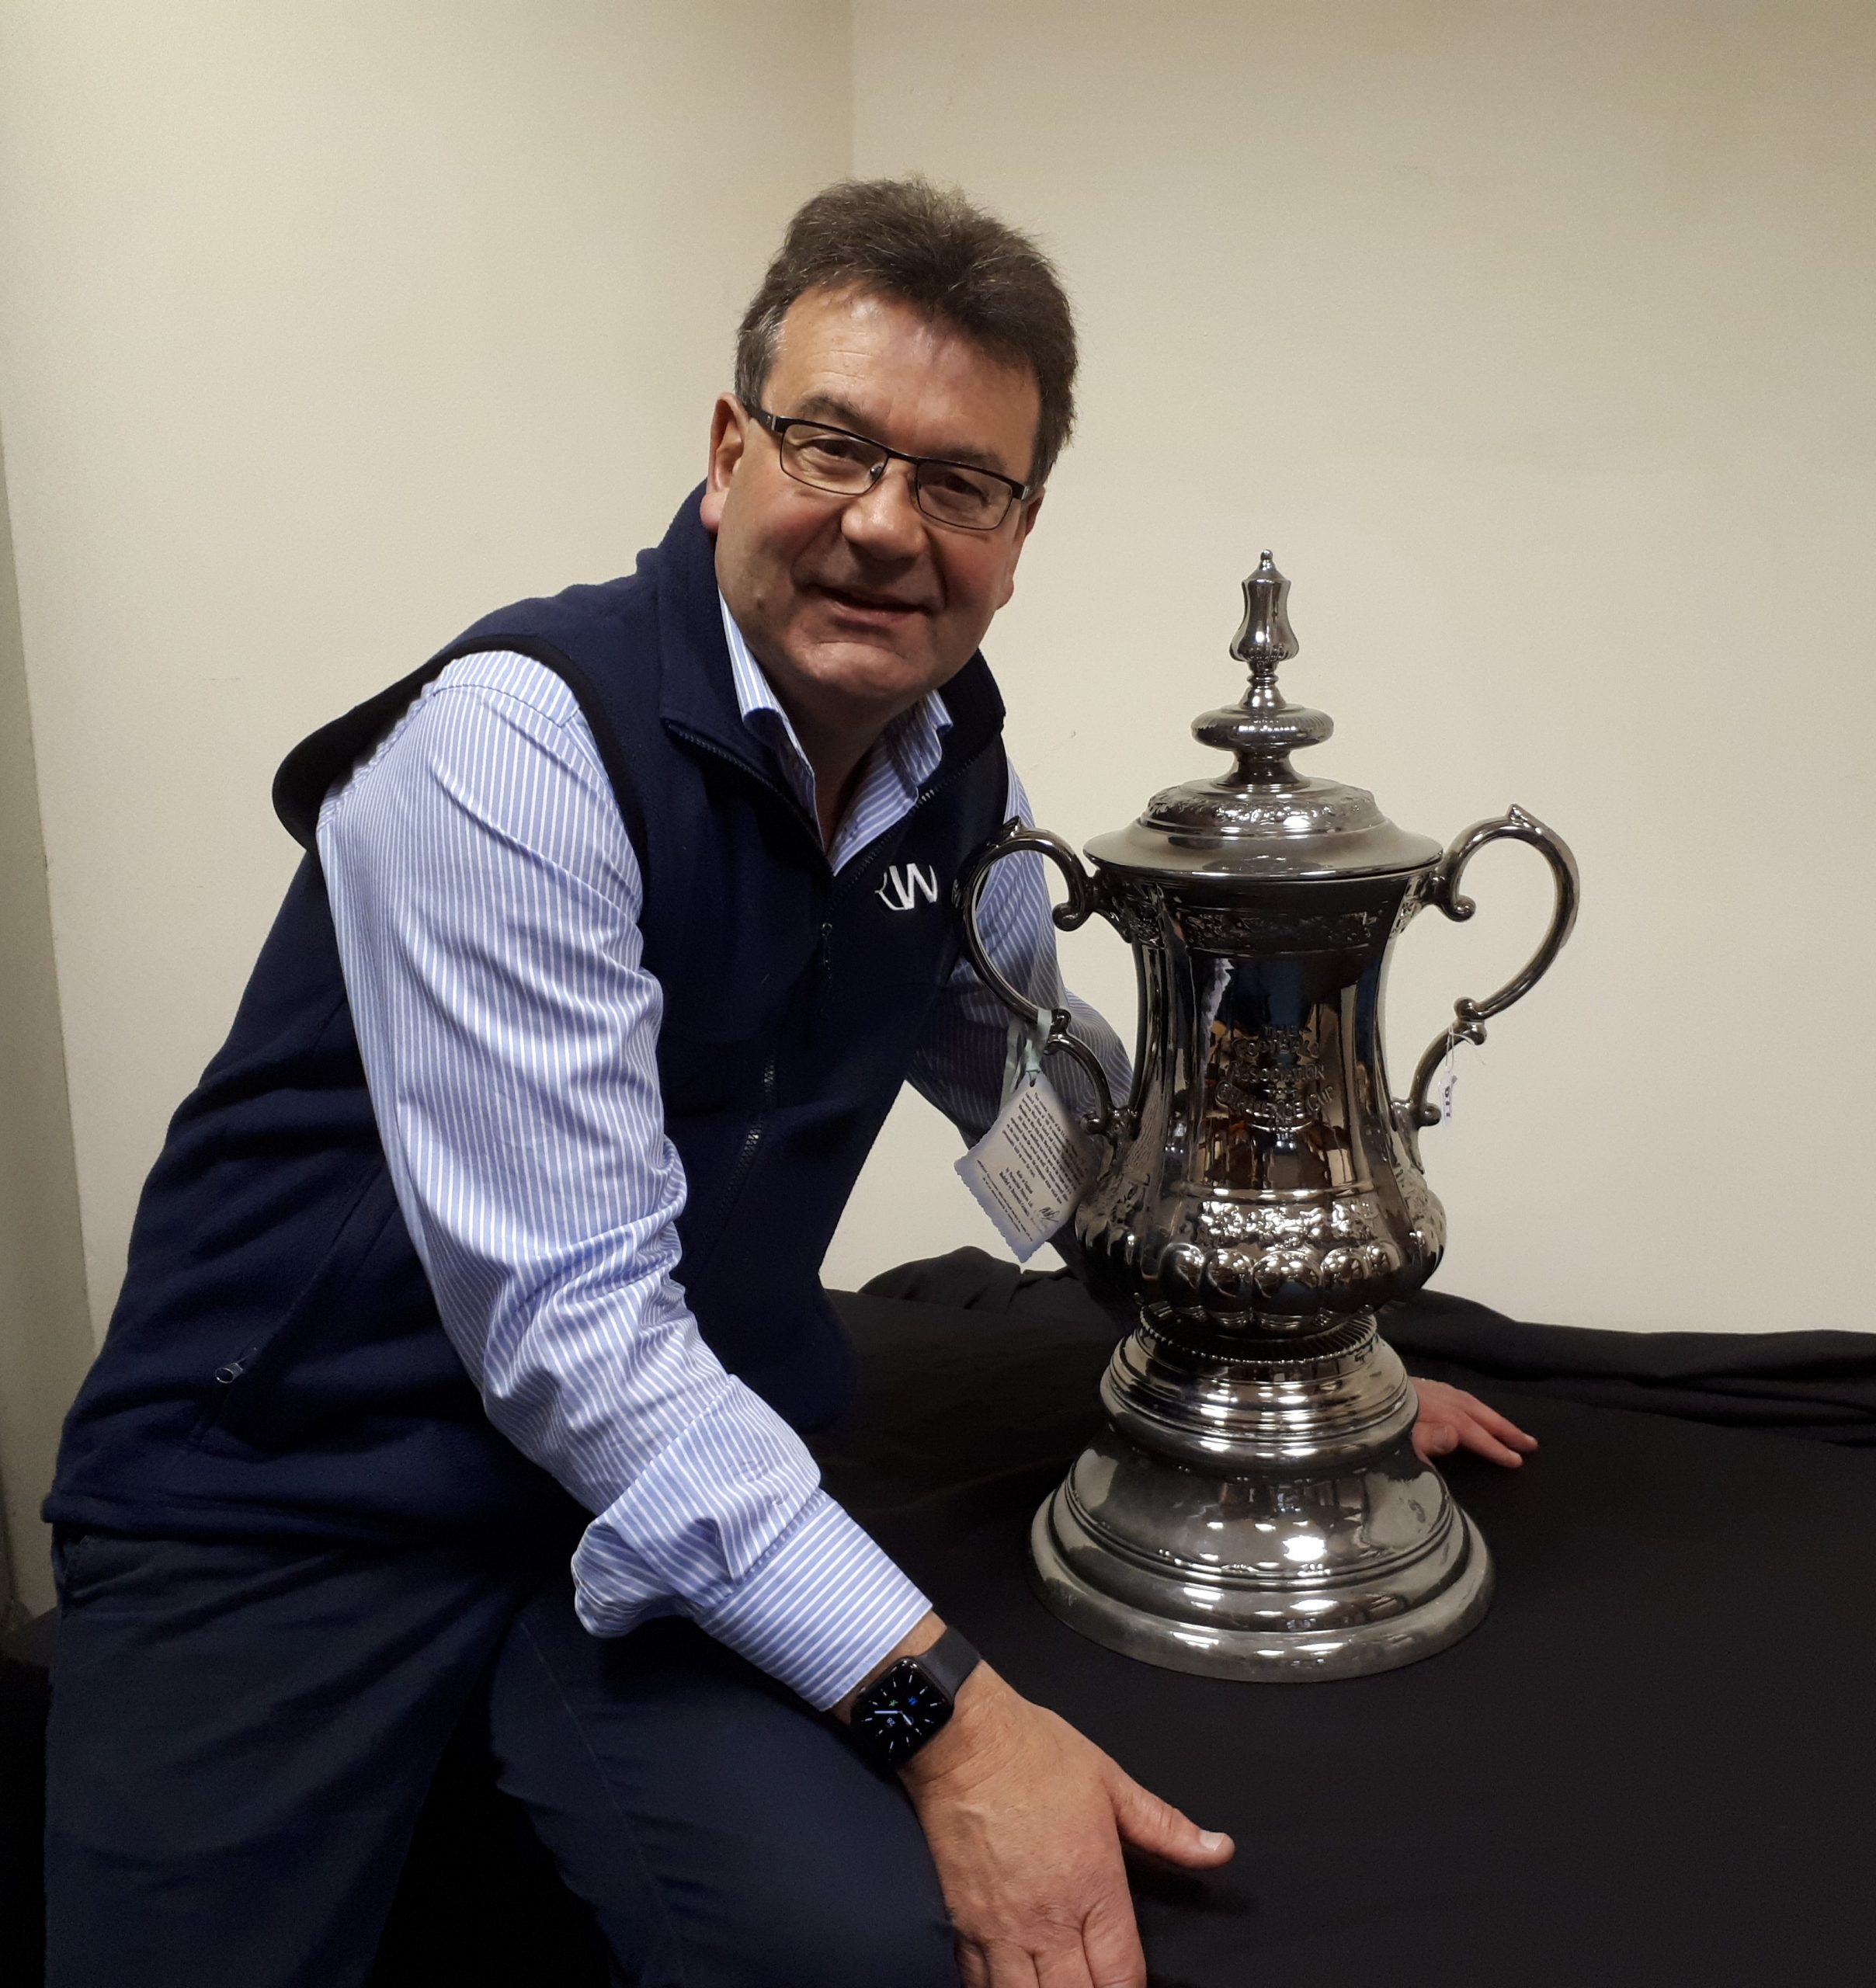 He can dream! Auctioneer Richard Winterton with the replica FA Cup.